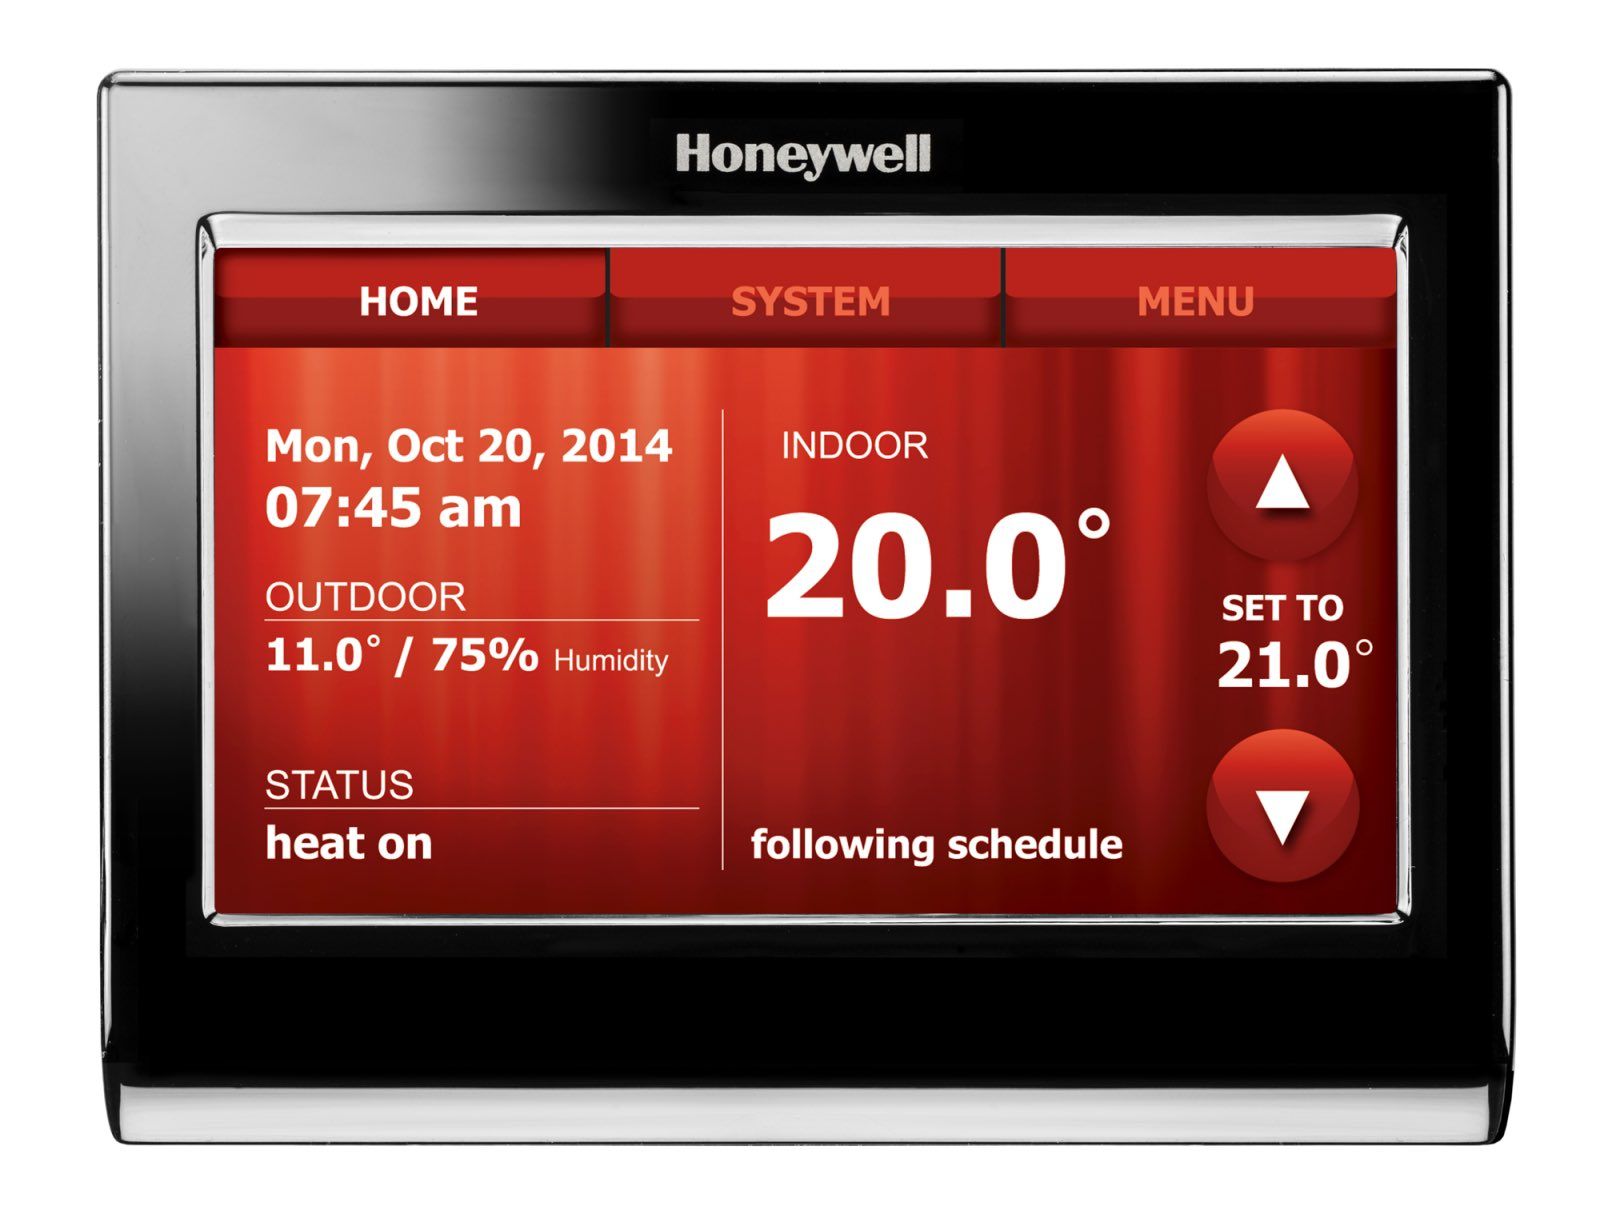 hello thermostat honeywell creates a heating system you can talk to image 3